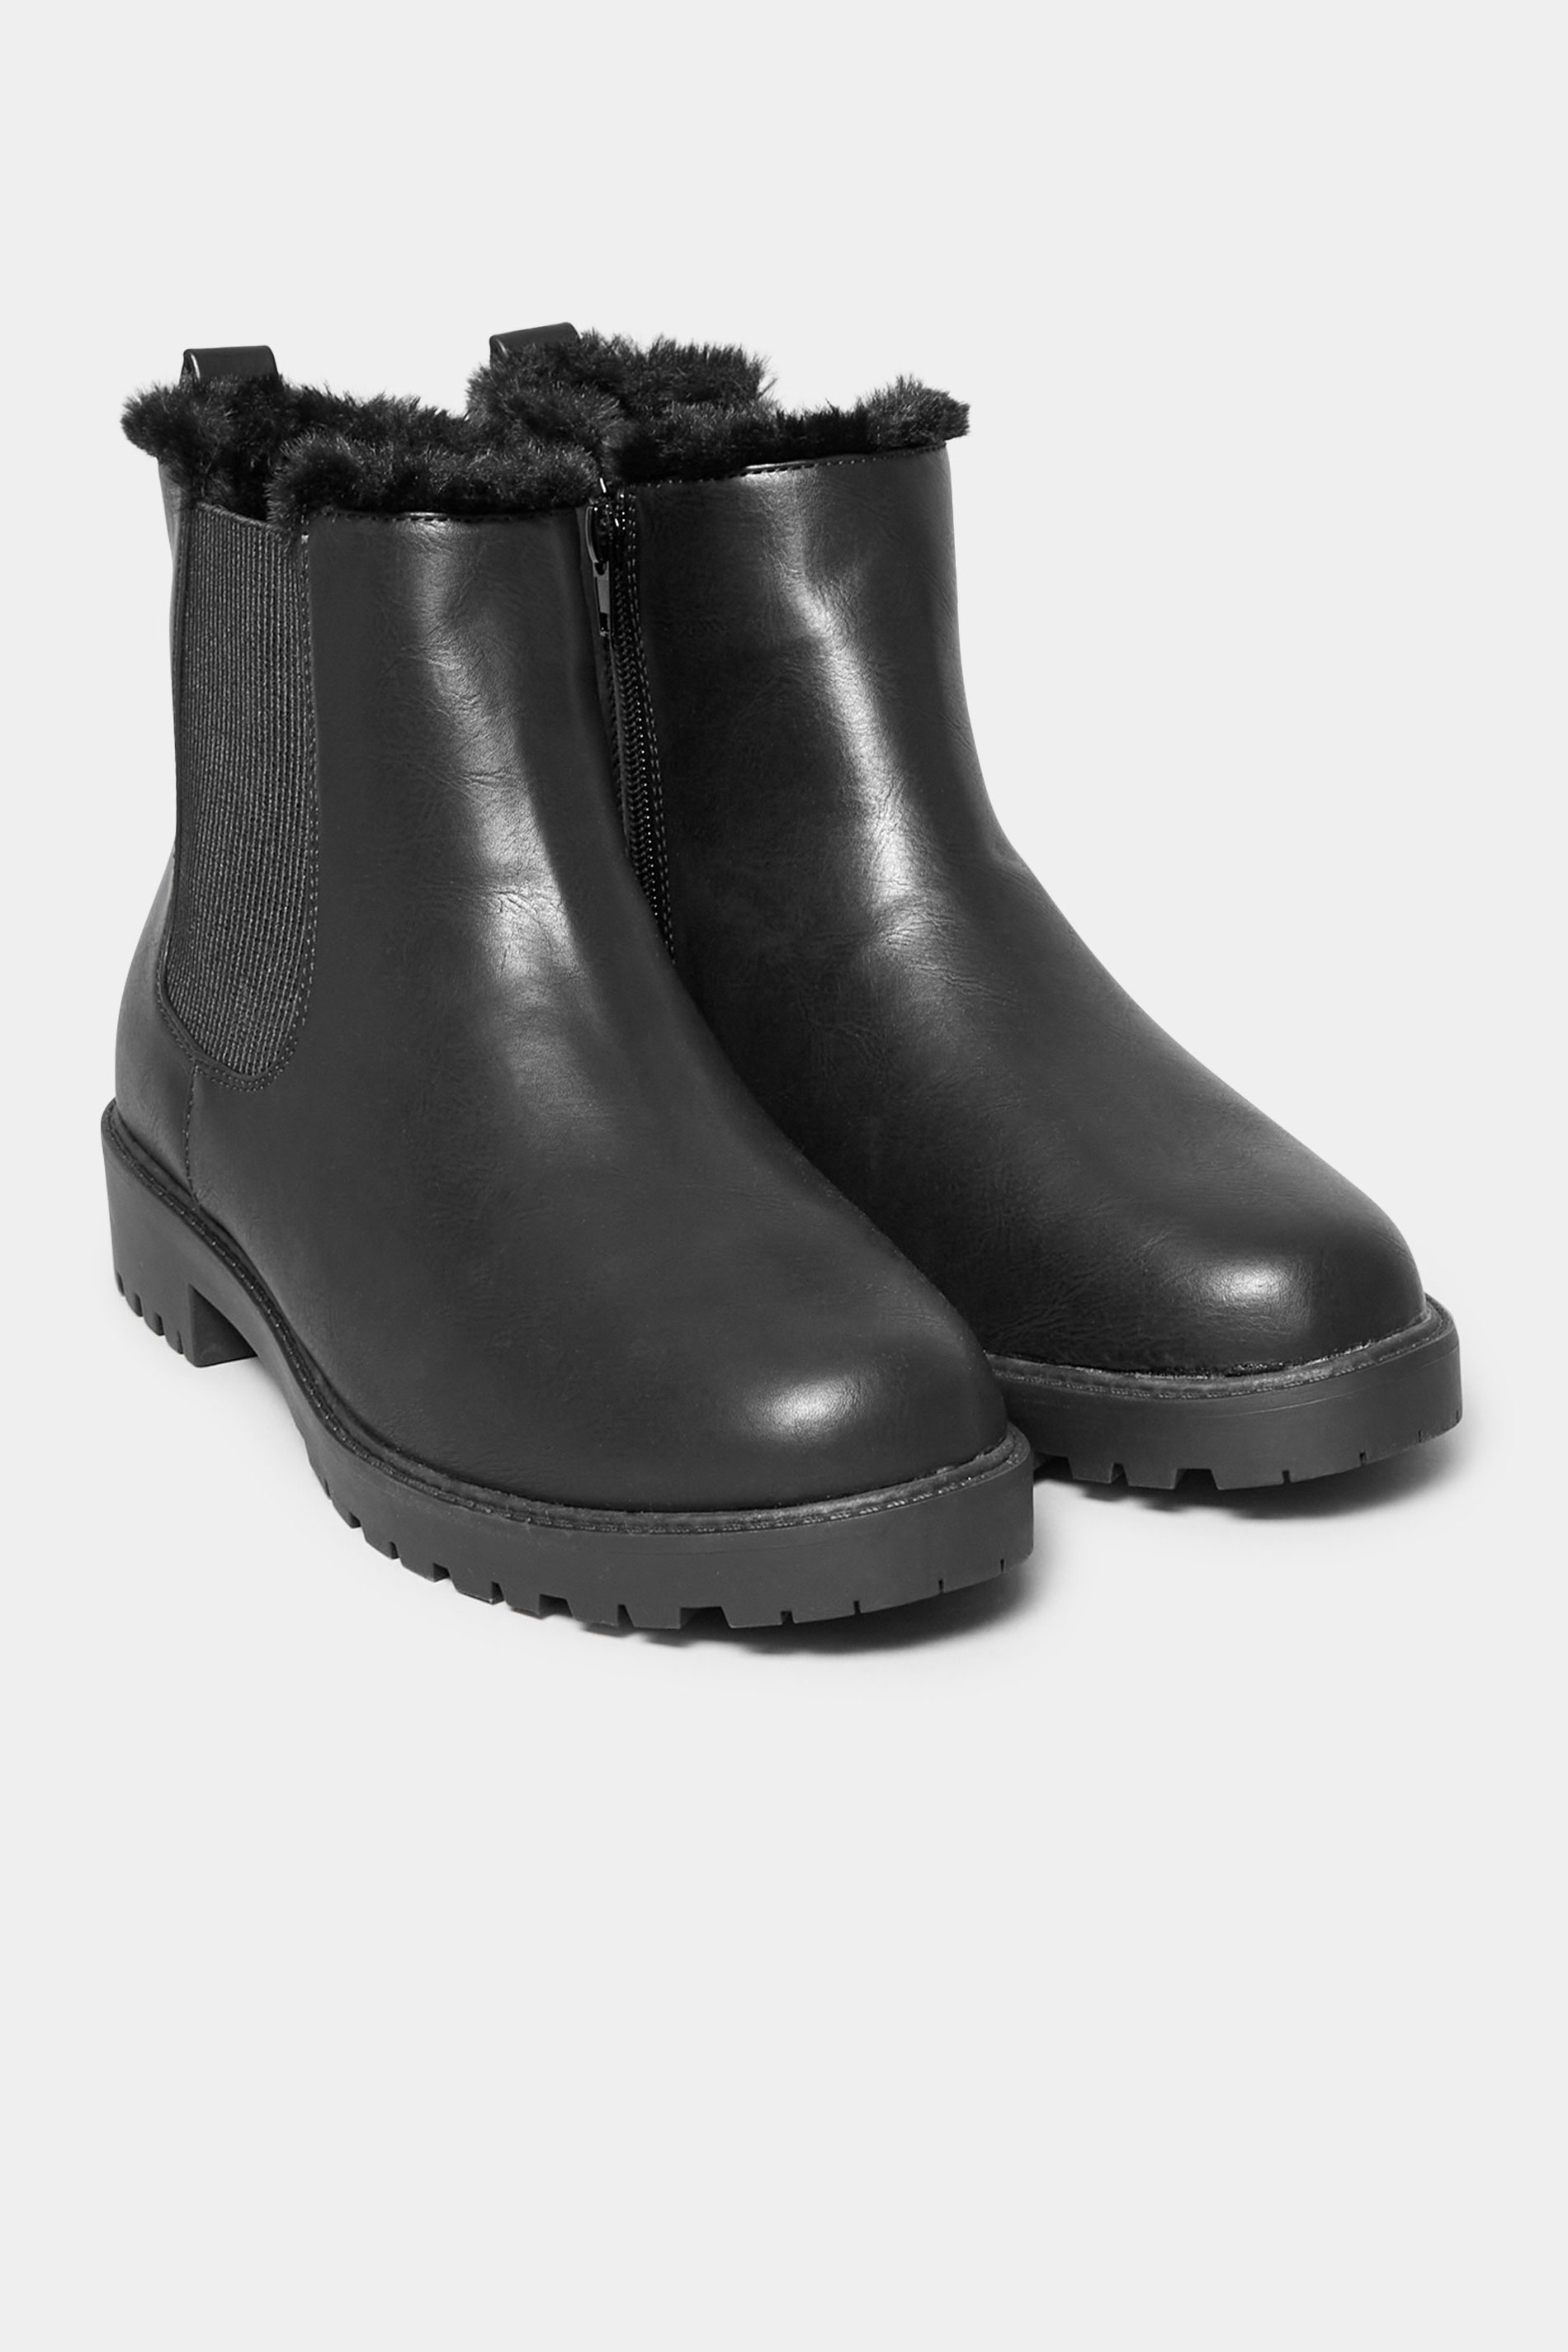 Black Faux Fur Chelsea Boots In Wide E Fit & Wide EEE Fit | Yours Clothing 2